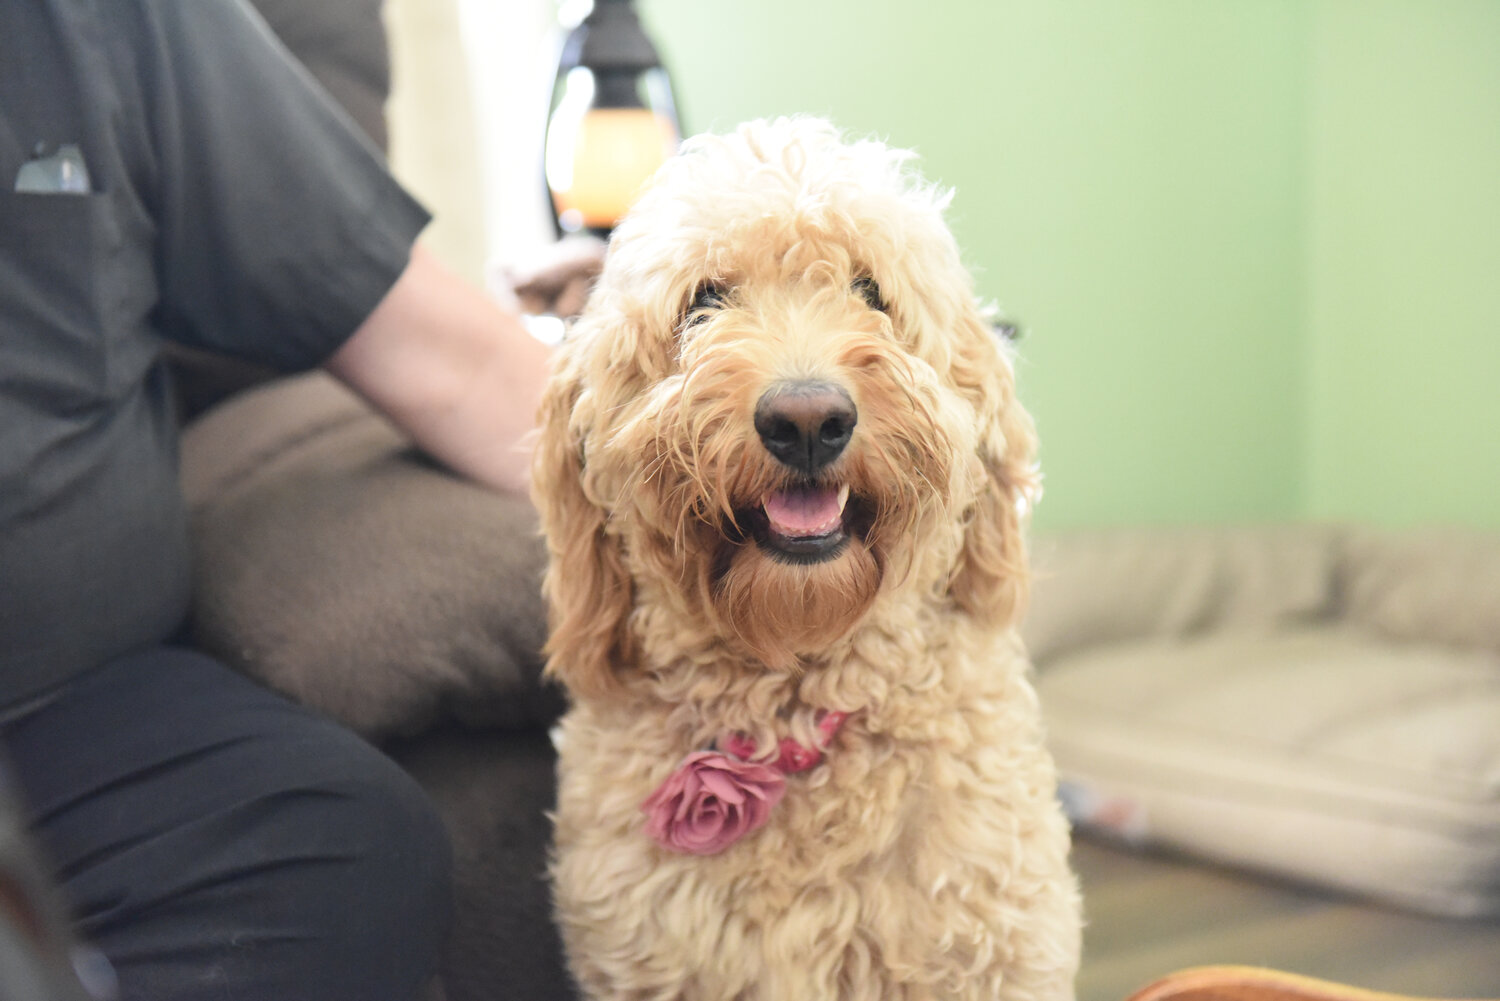 Father William Peckman’s Goldendoodle, and Molly, plays in the St. Mary Rectory in Shelbina.